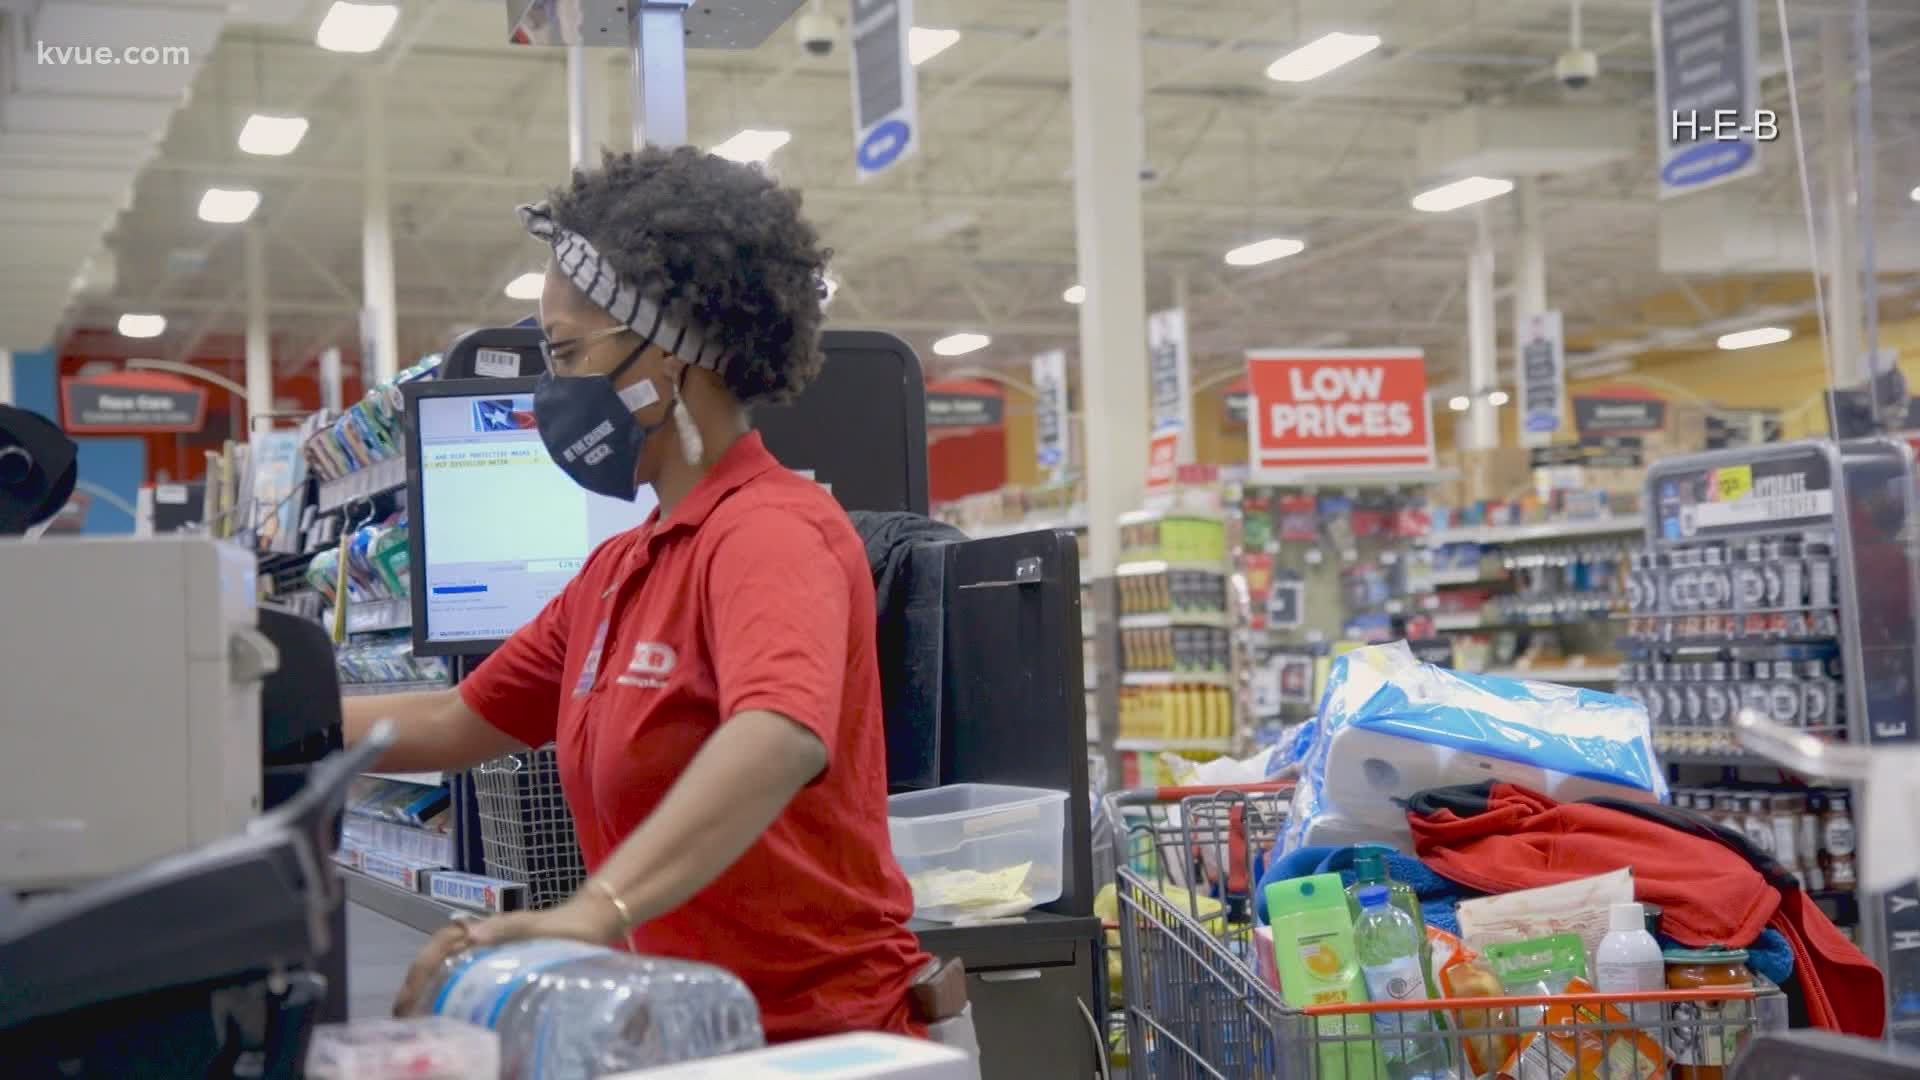 H-E-B is reversing its previous stance and now saying it will require customers to continue wearing face masks once the statewide mask mandate is lifted.